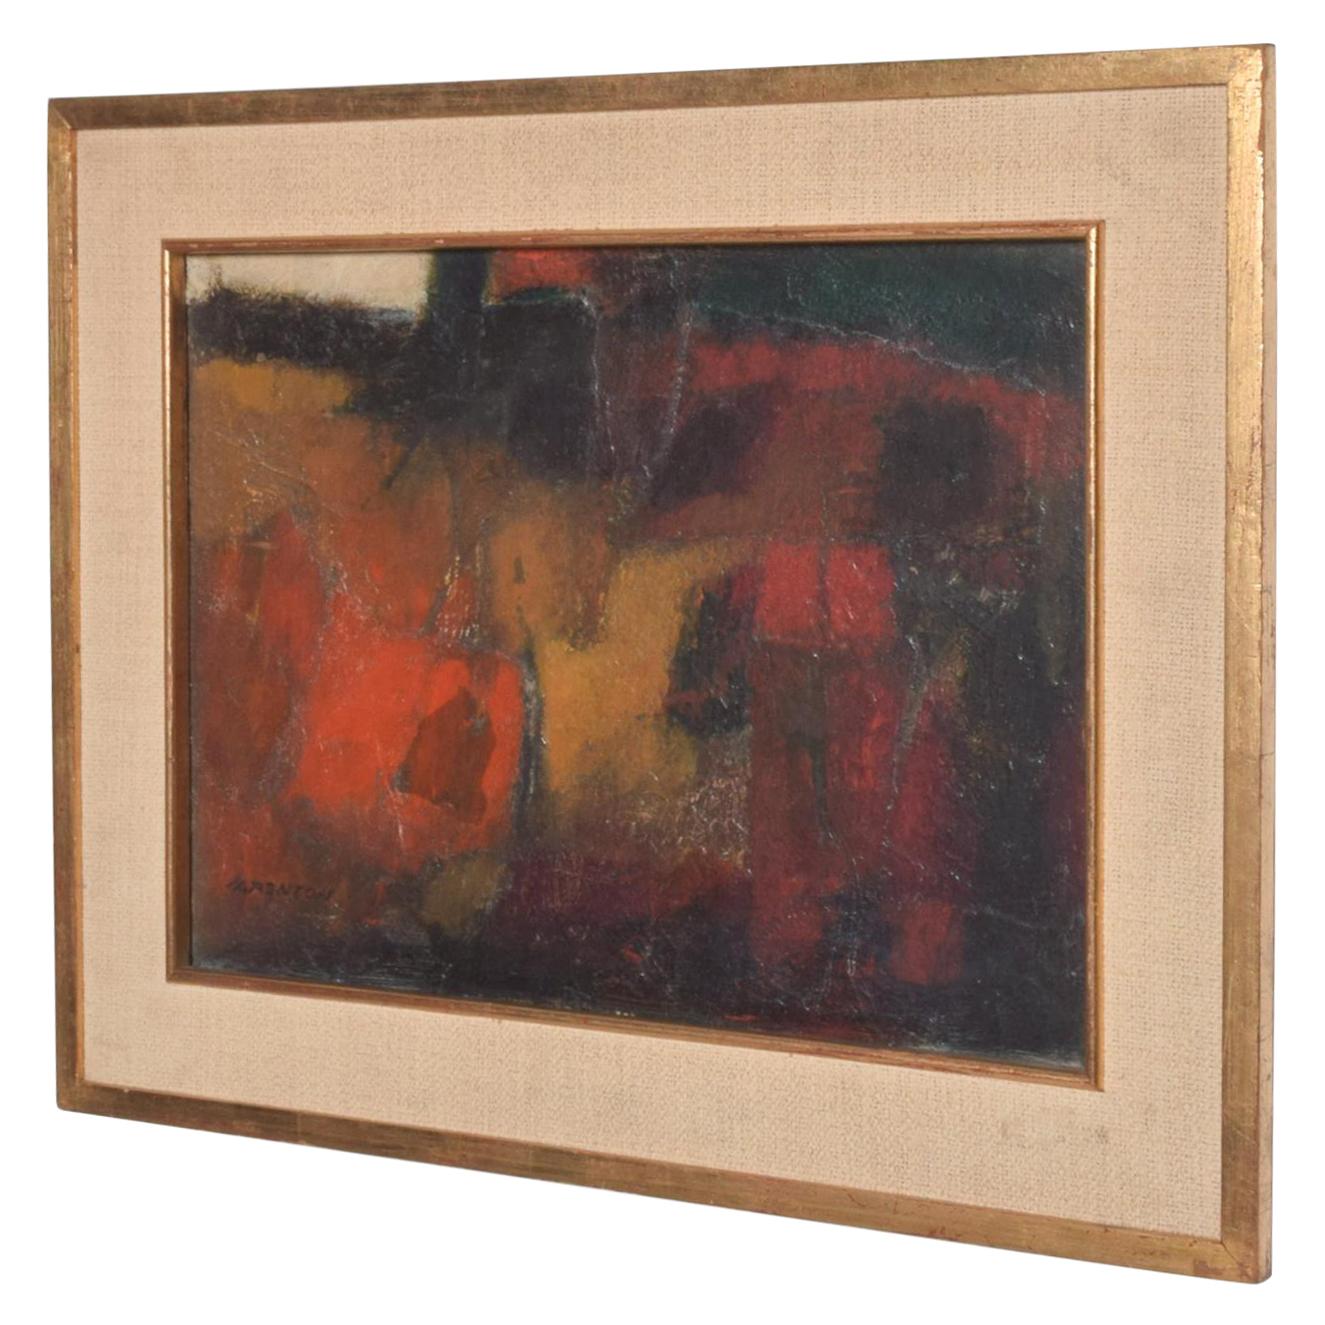 
Mid Century Modern Oil on Board painting
Abstract Art signed lower-left corner Ilarenton, but difficult to read.
Original frame with gold leaf.
In the style of artist Leonardo Nierman.
20w x 16h art 15w x 11h
Unaltered Original Vintage